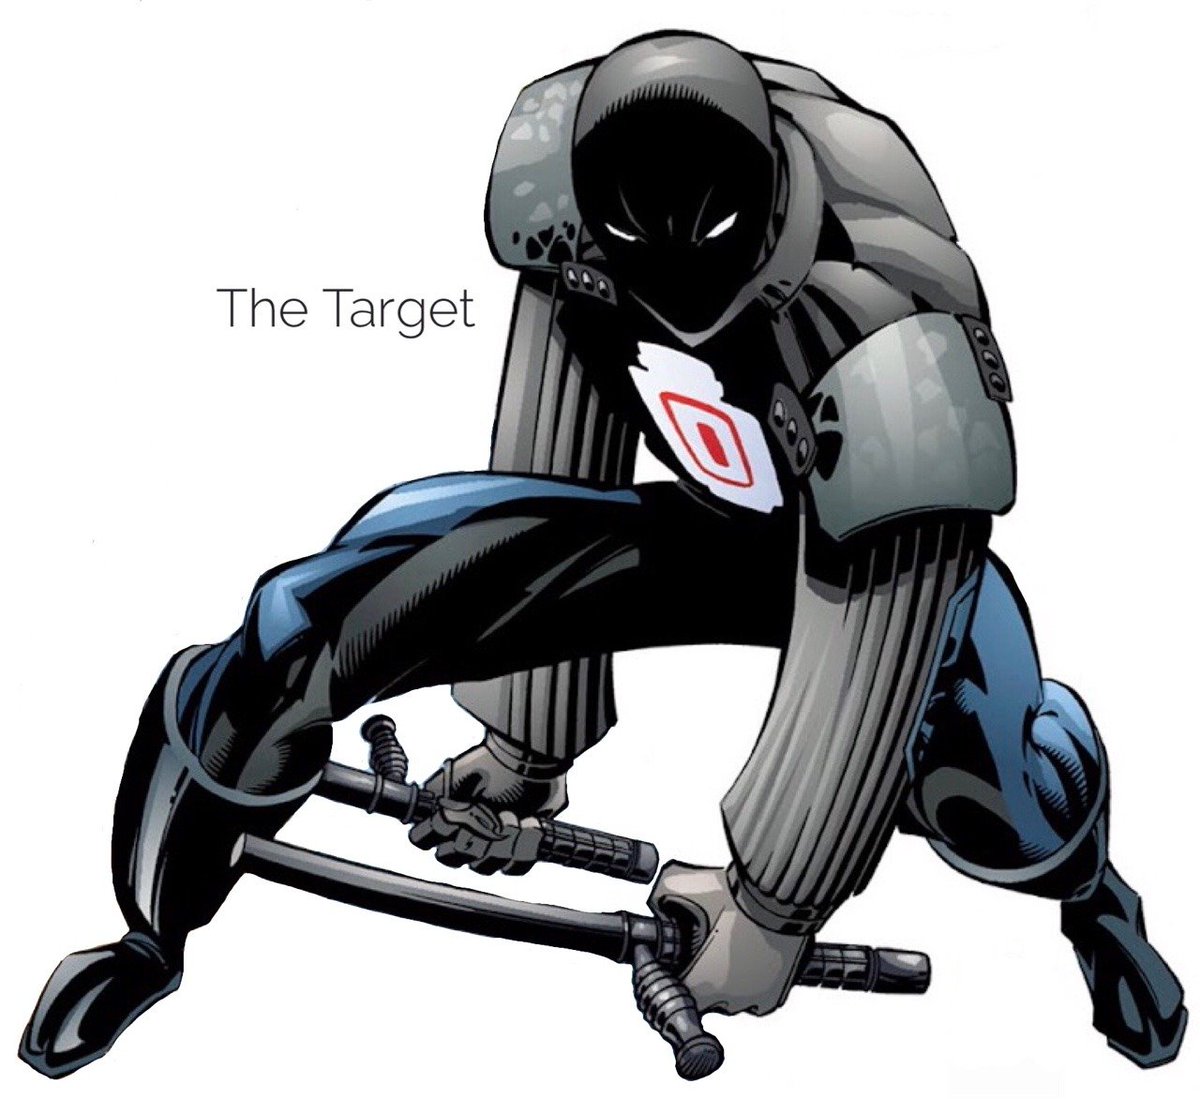 7. Richard Grayson aka The Target, Grayson momentarily took on this antihero identity in order to go deep to expose some corrupt Policemen in Bludhaven but knew he couldn't fight back against the Police under his Nightwing persona since he had to keep up with "heroic" appearances